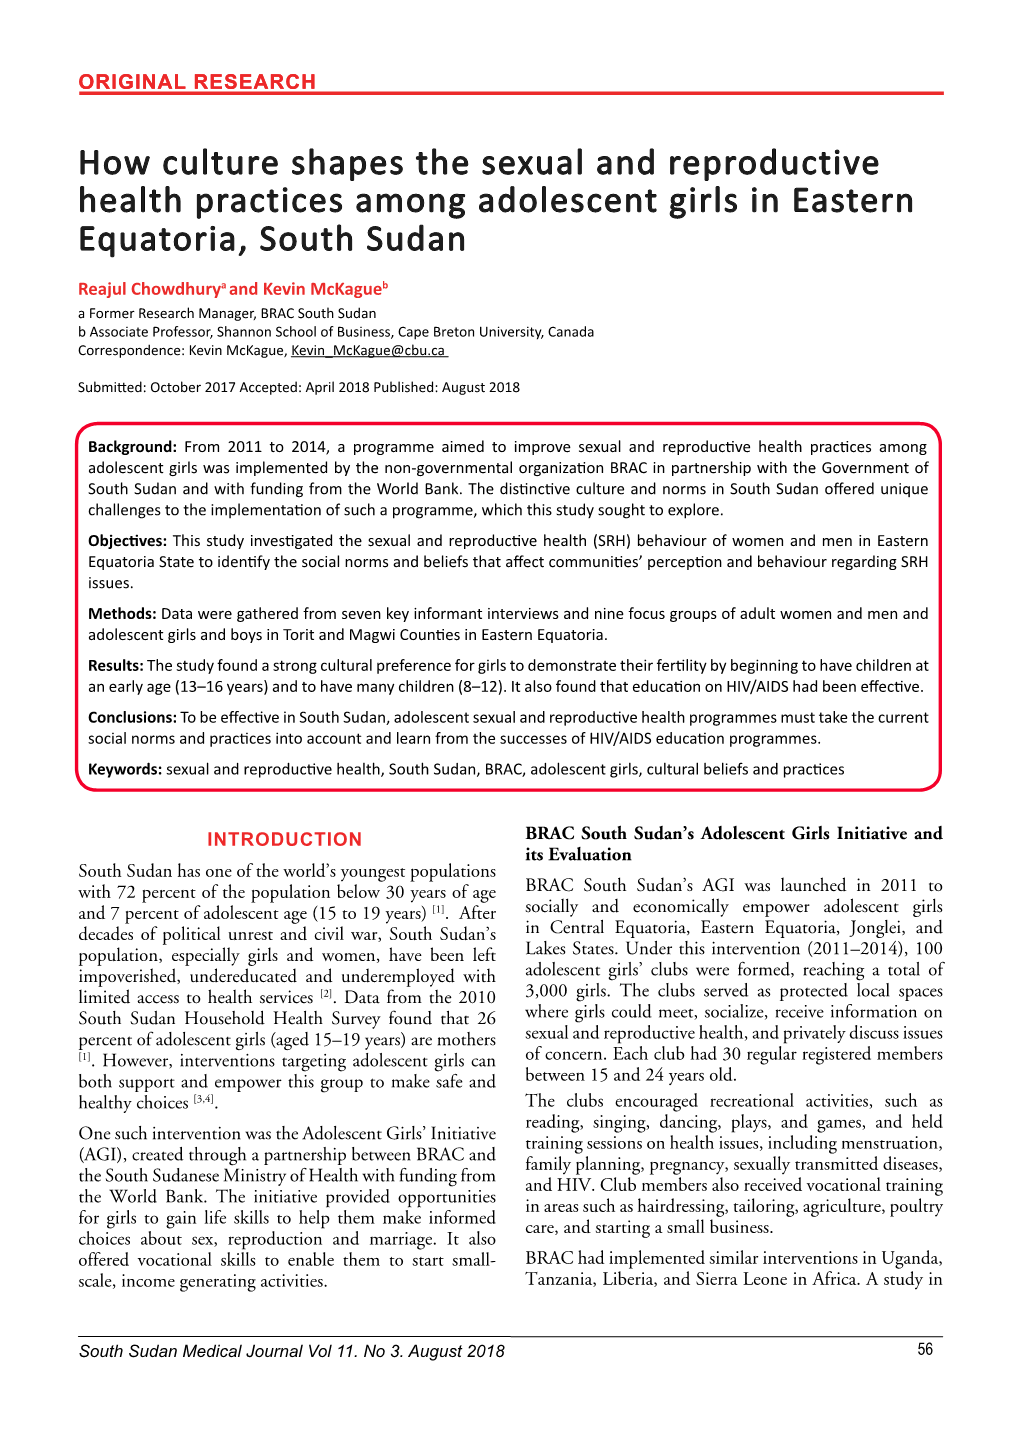 How Culture Shapes the Sexual and Reproductive Health Practices Among Adolescent Girls in Eastern Equatoria, South Sudan